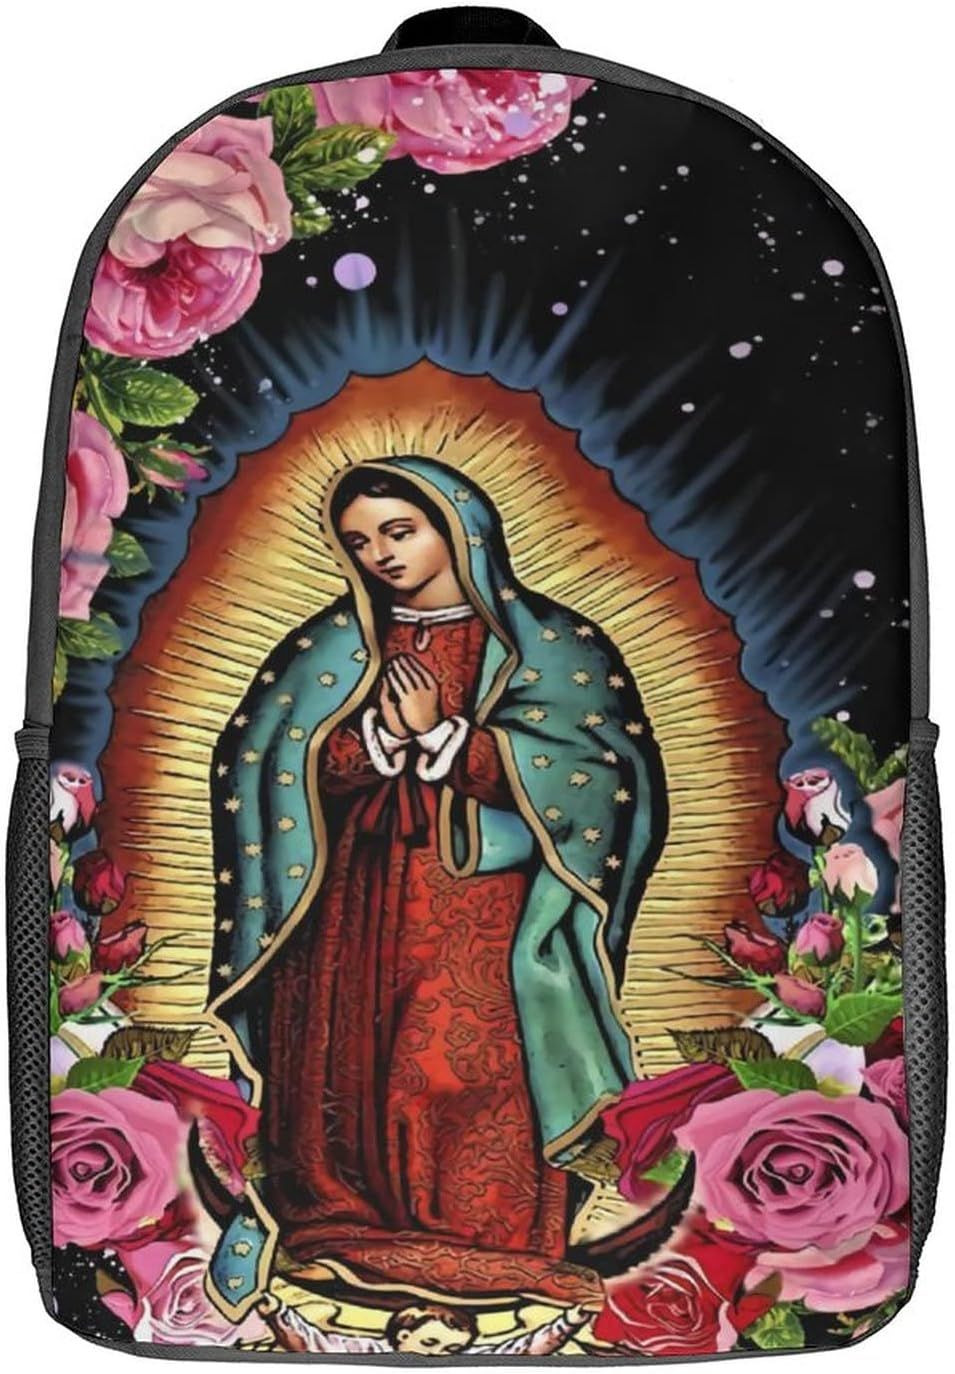 Waygotee Our Lady of Guadalupe Virgin Mary 3D Print Backpacks Bookbag A-02 